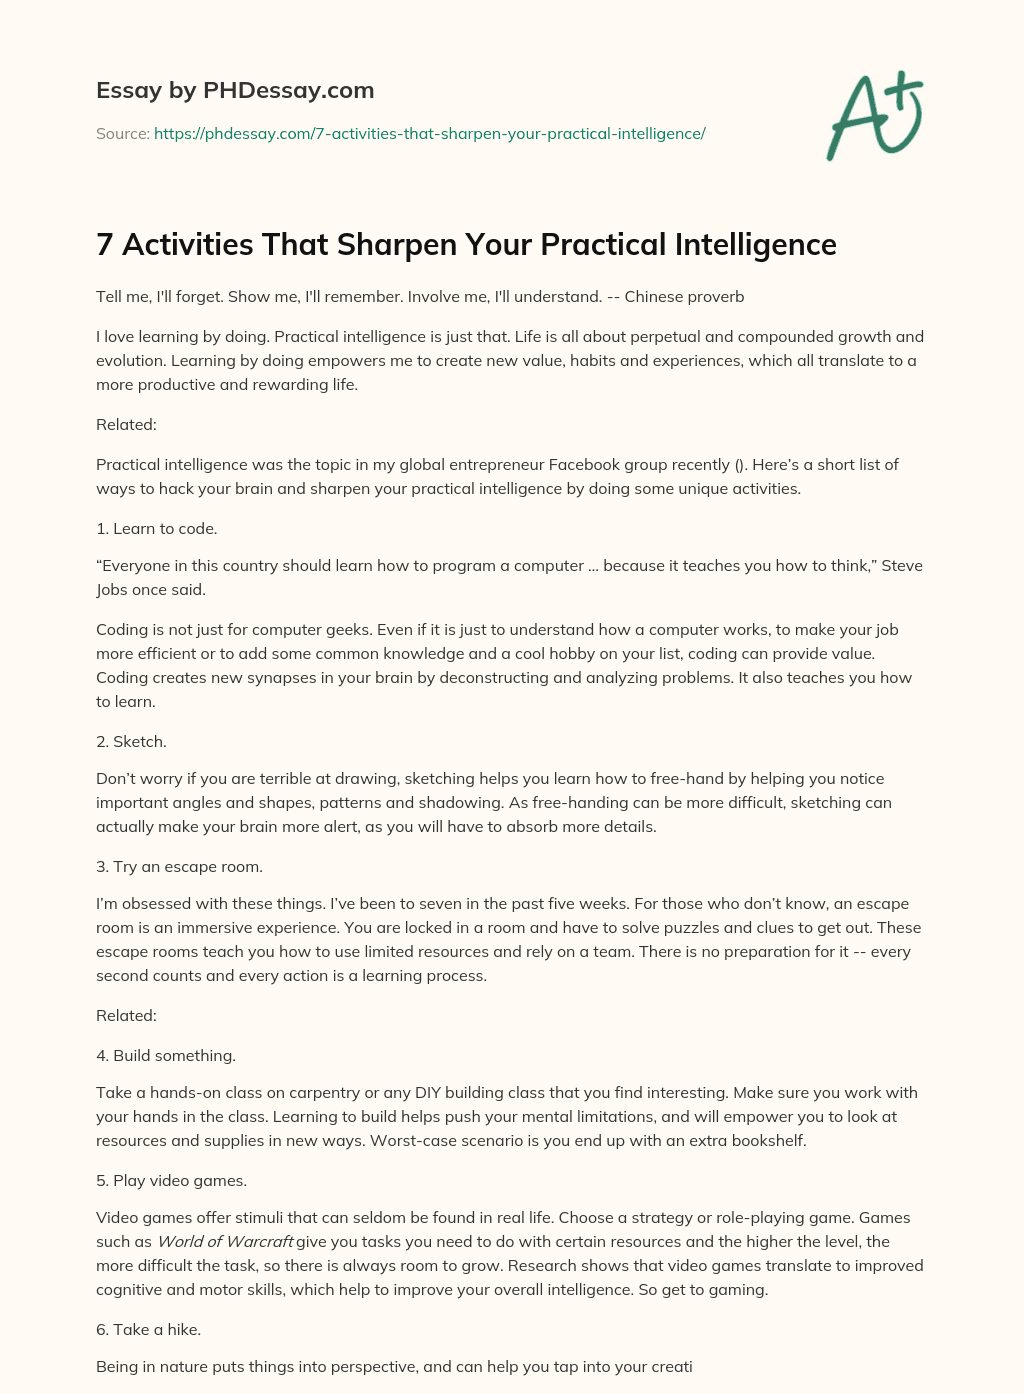 7 Activities That Sharpen Your Practical Intelligence essay